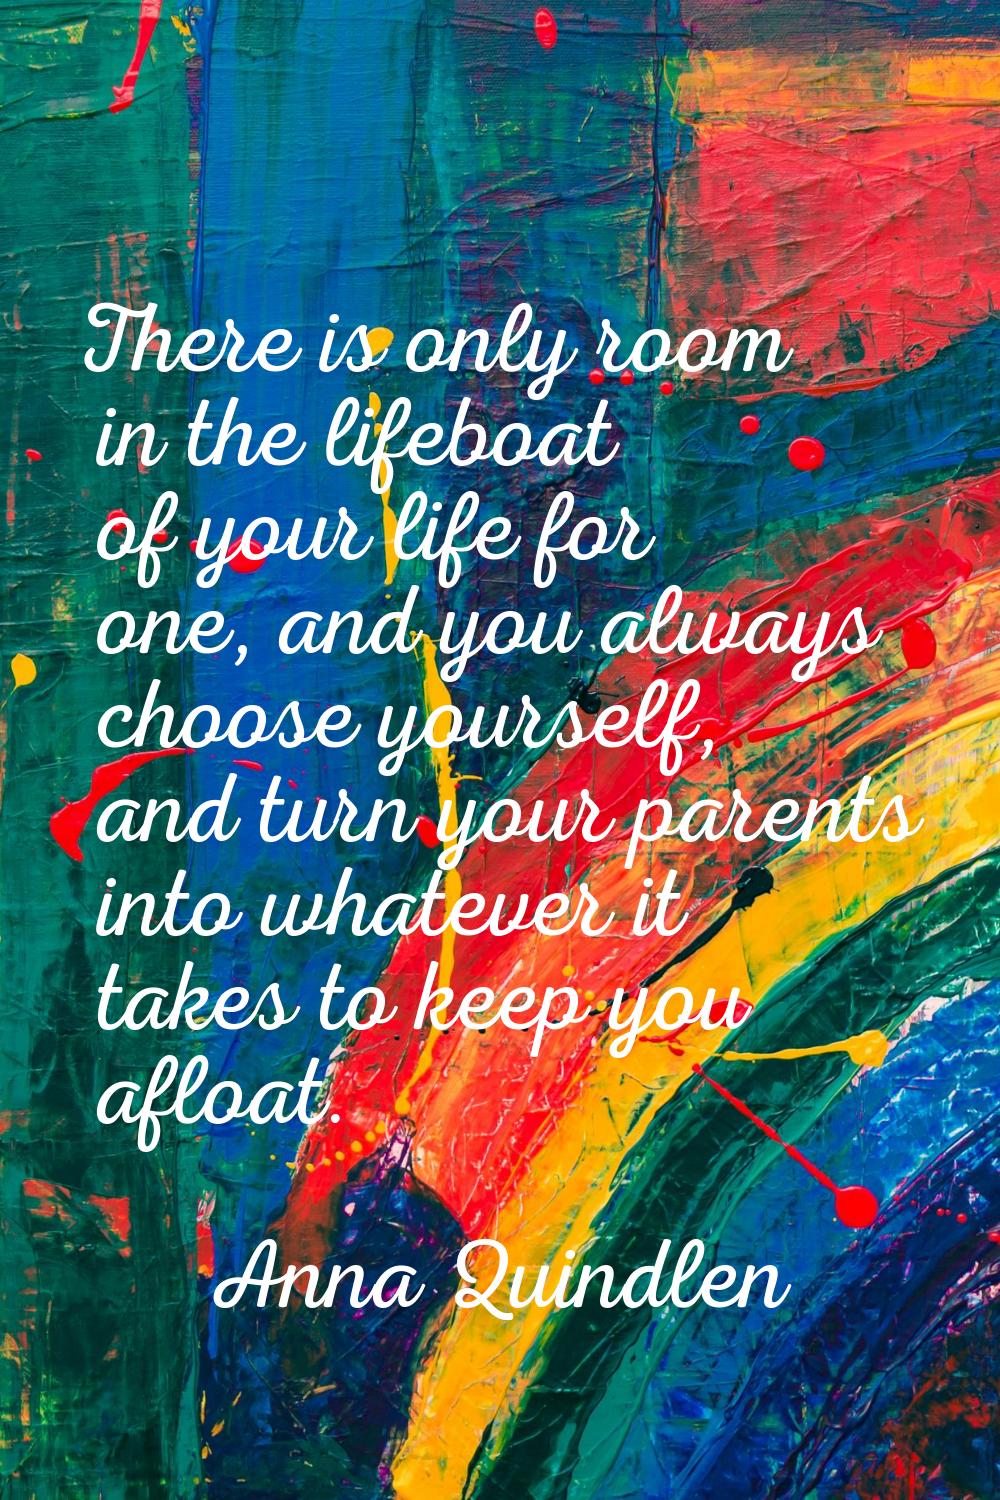 There is only room in the lifeboat of your life for one, and you always choose yourself, and turn y